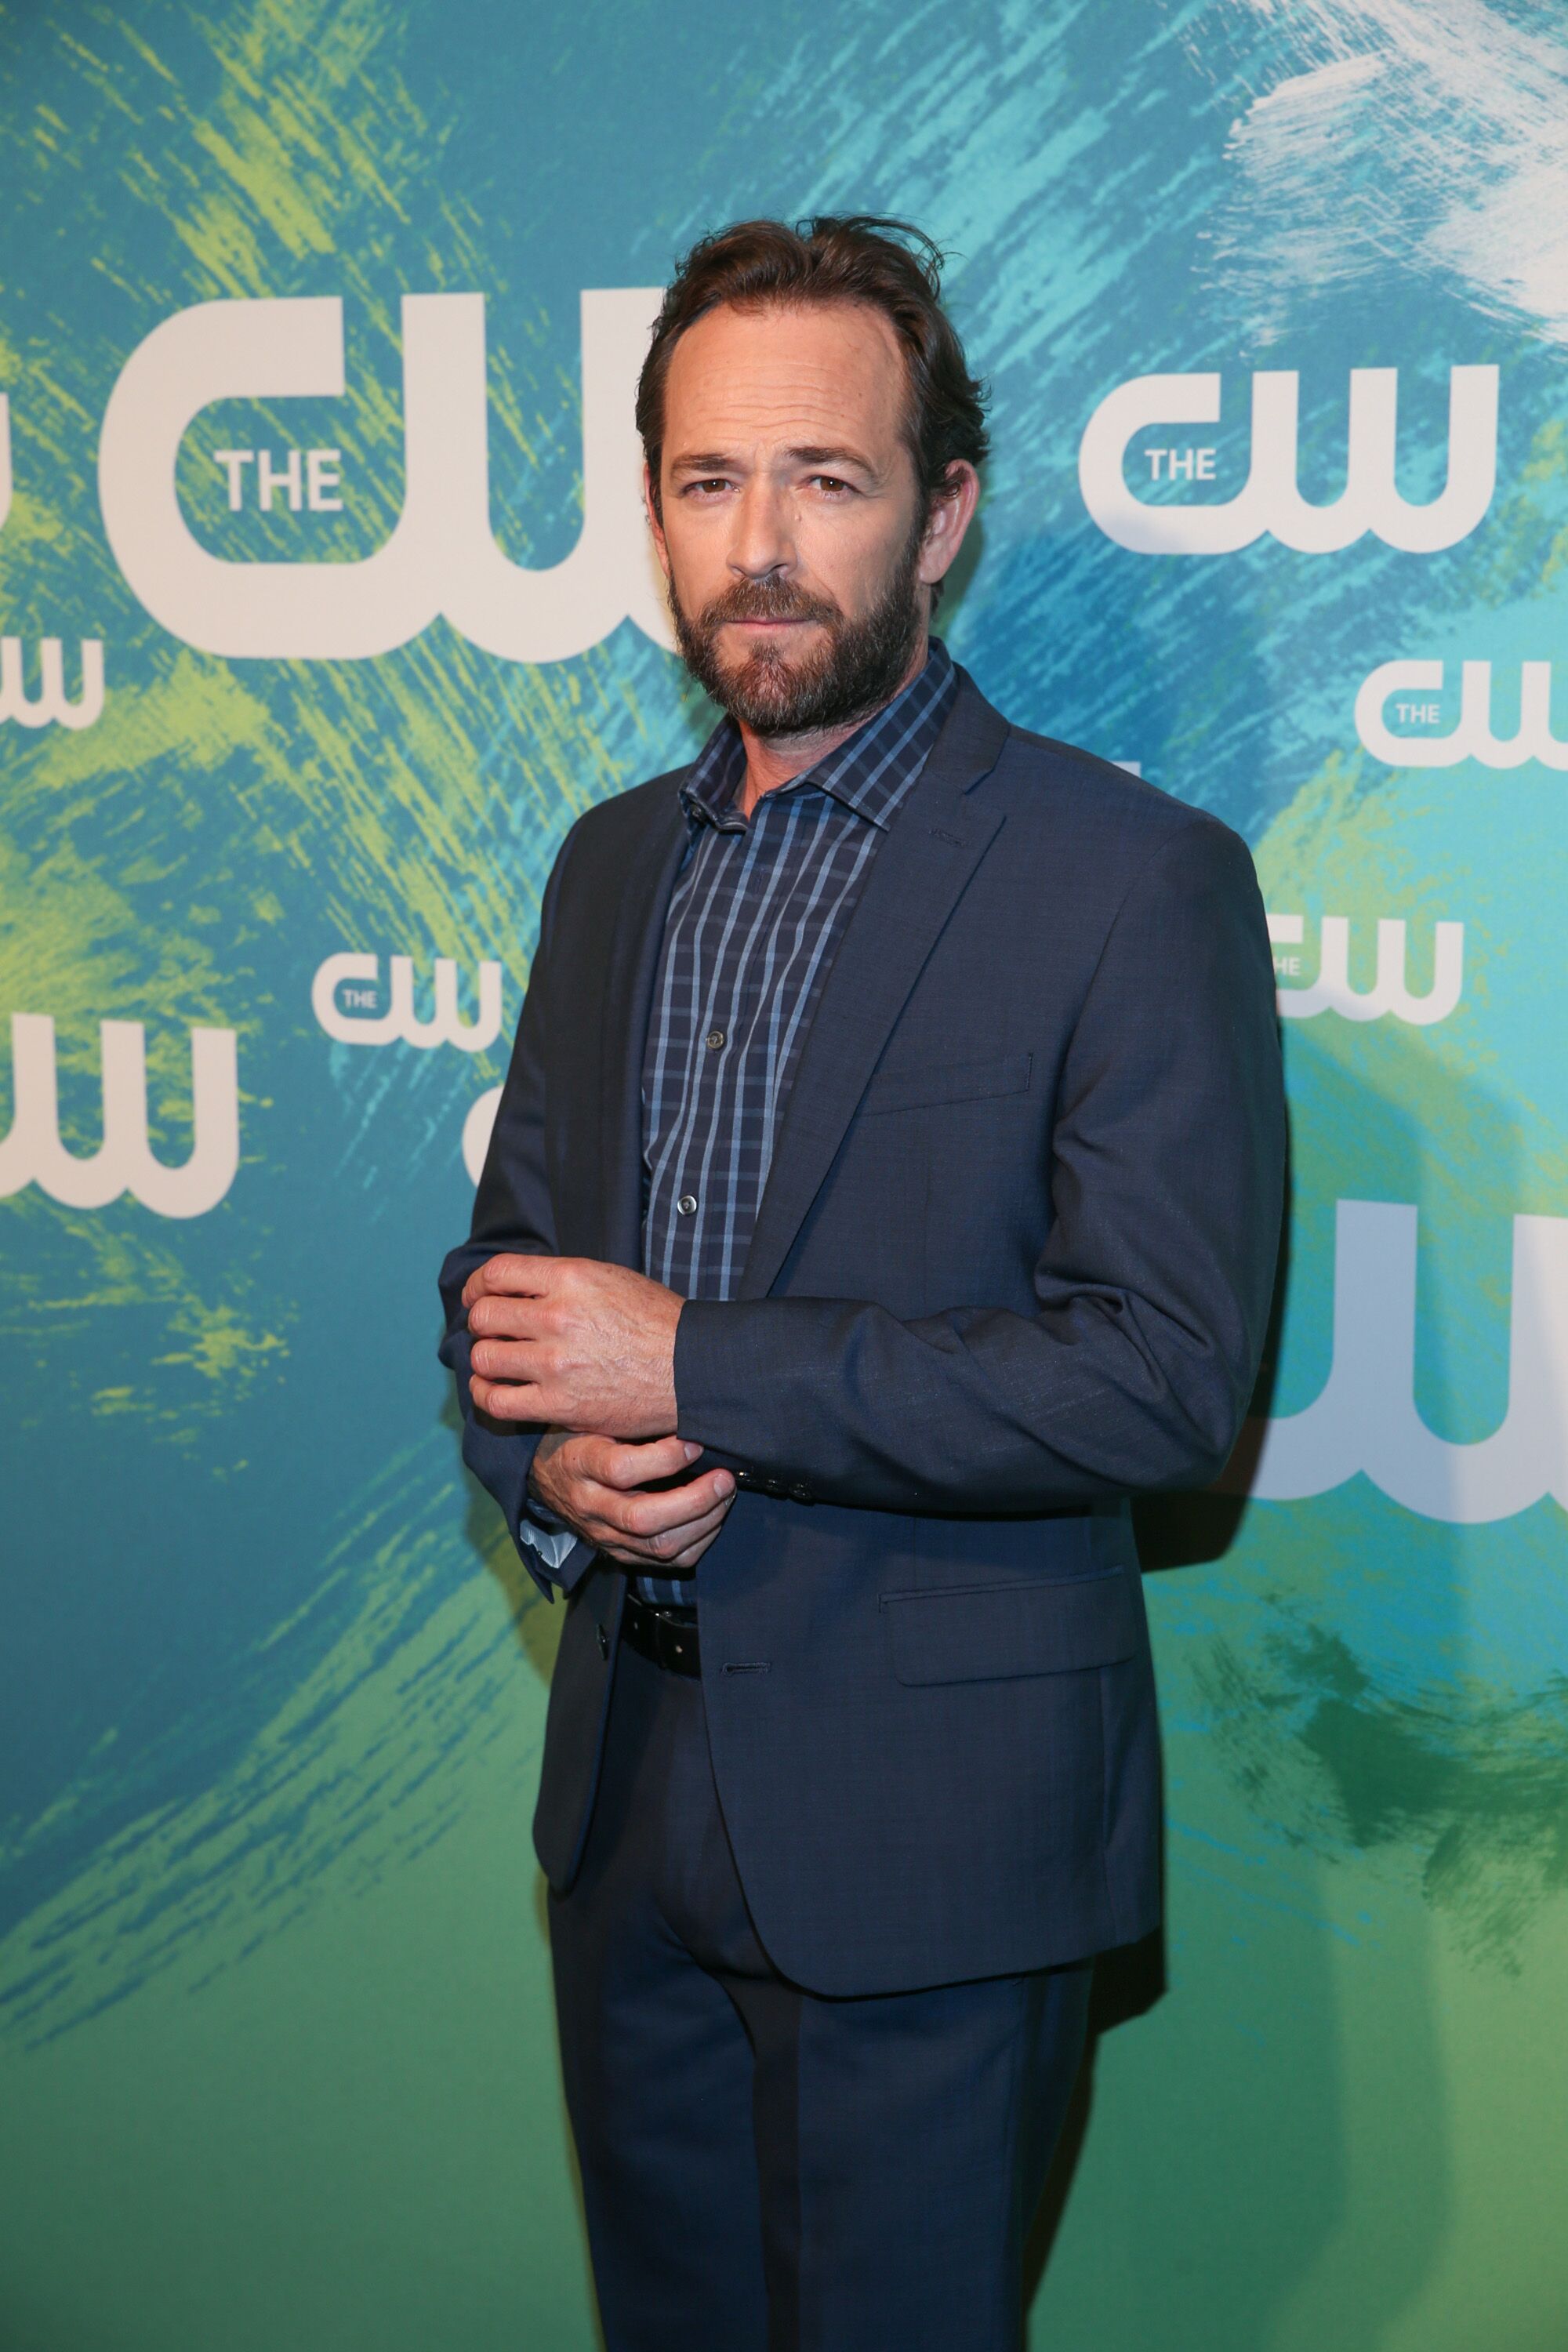 Luke Perry attends The CW Network's 2016 New York Upfront Presentation on May 19, 2016 | Photo: Getty Images